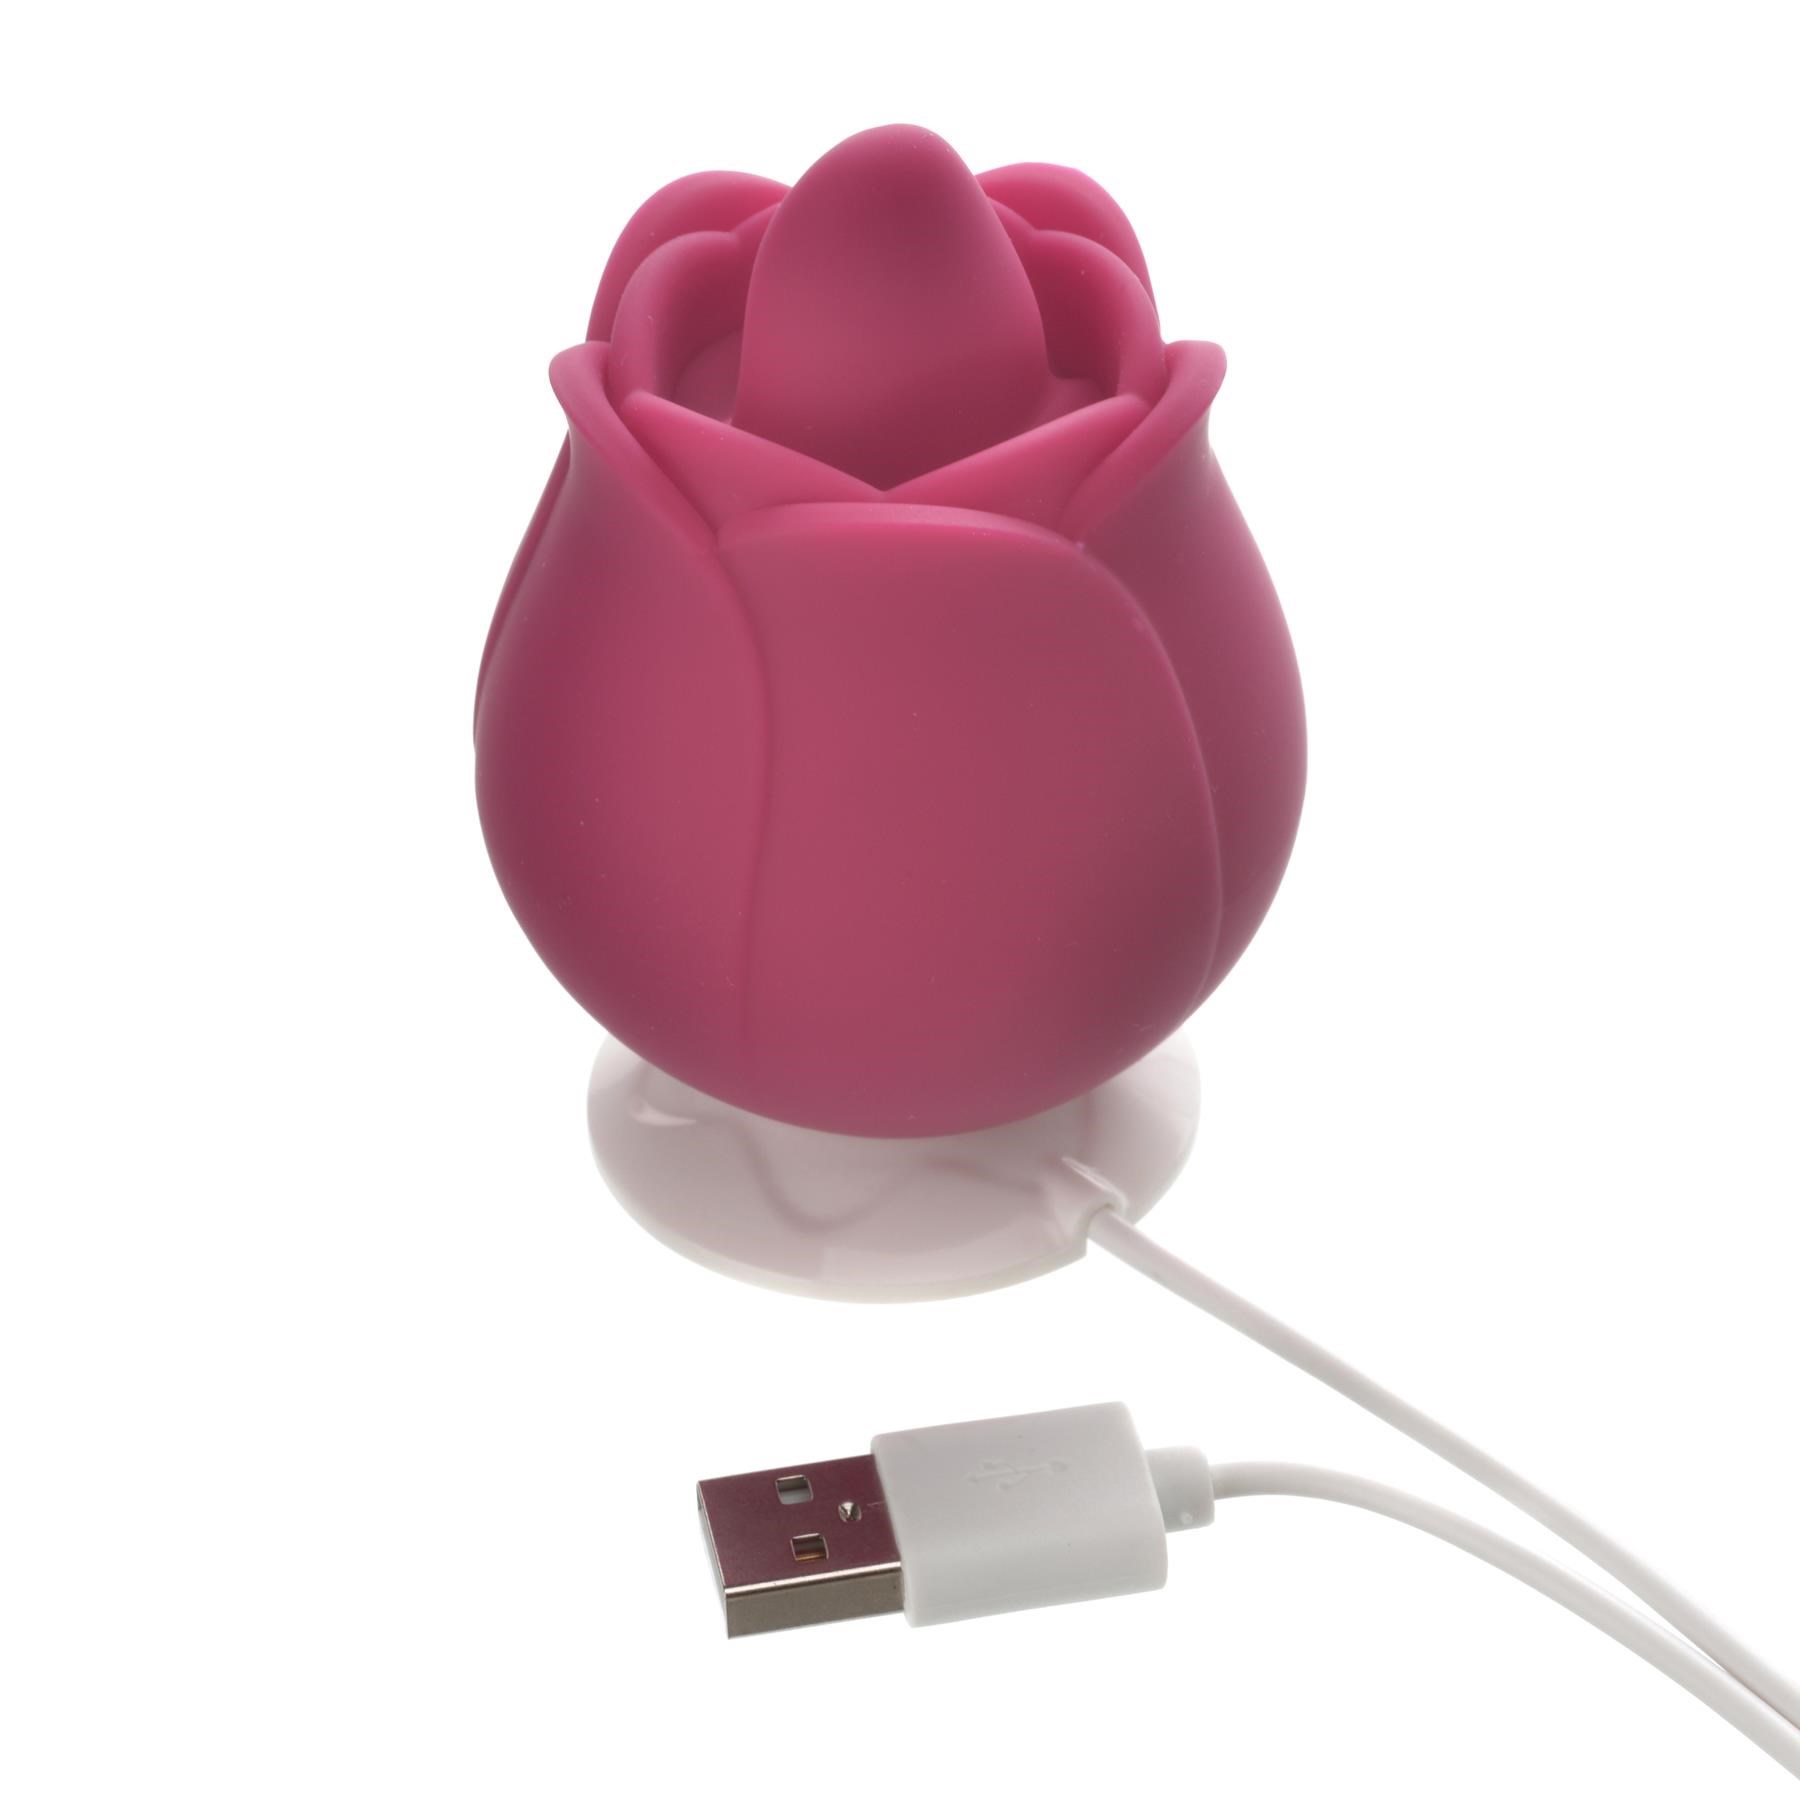 Rosegasm Rose Blossom Lick Me Massager- Showing Where Charging Cable is Placed